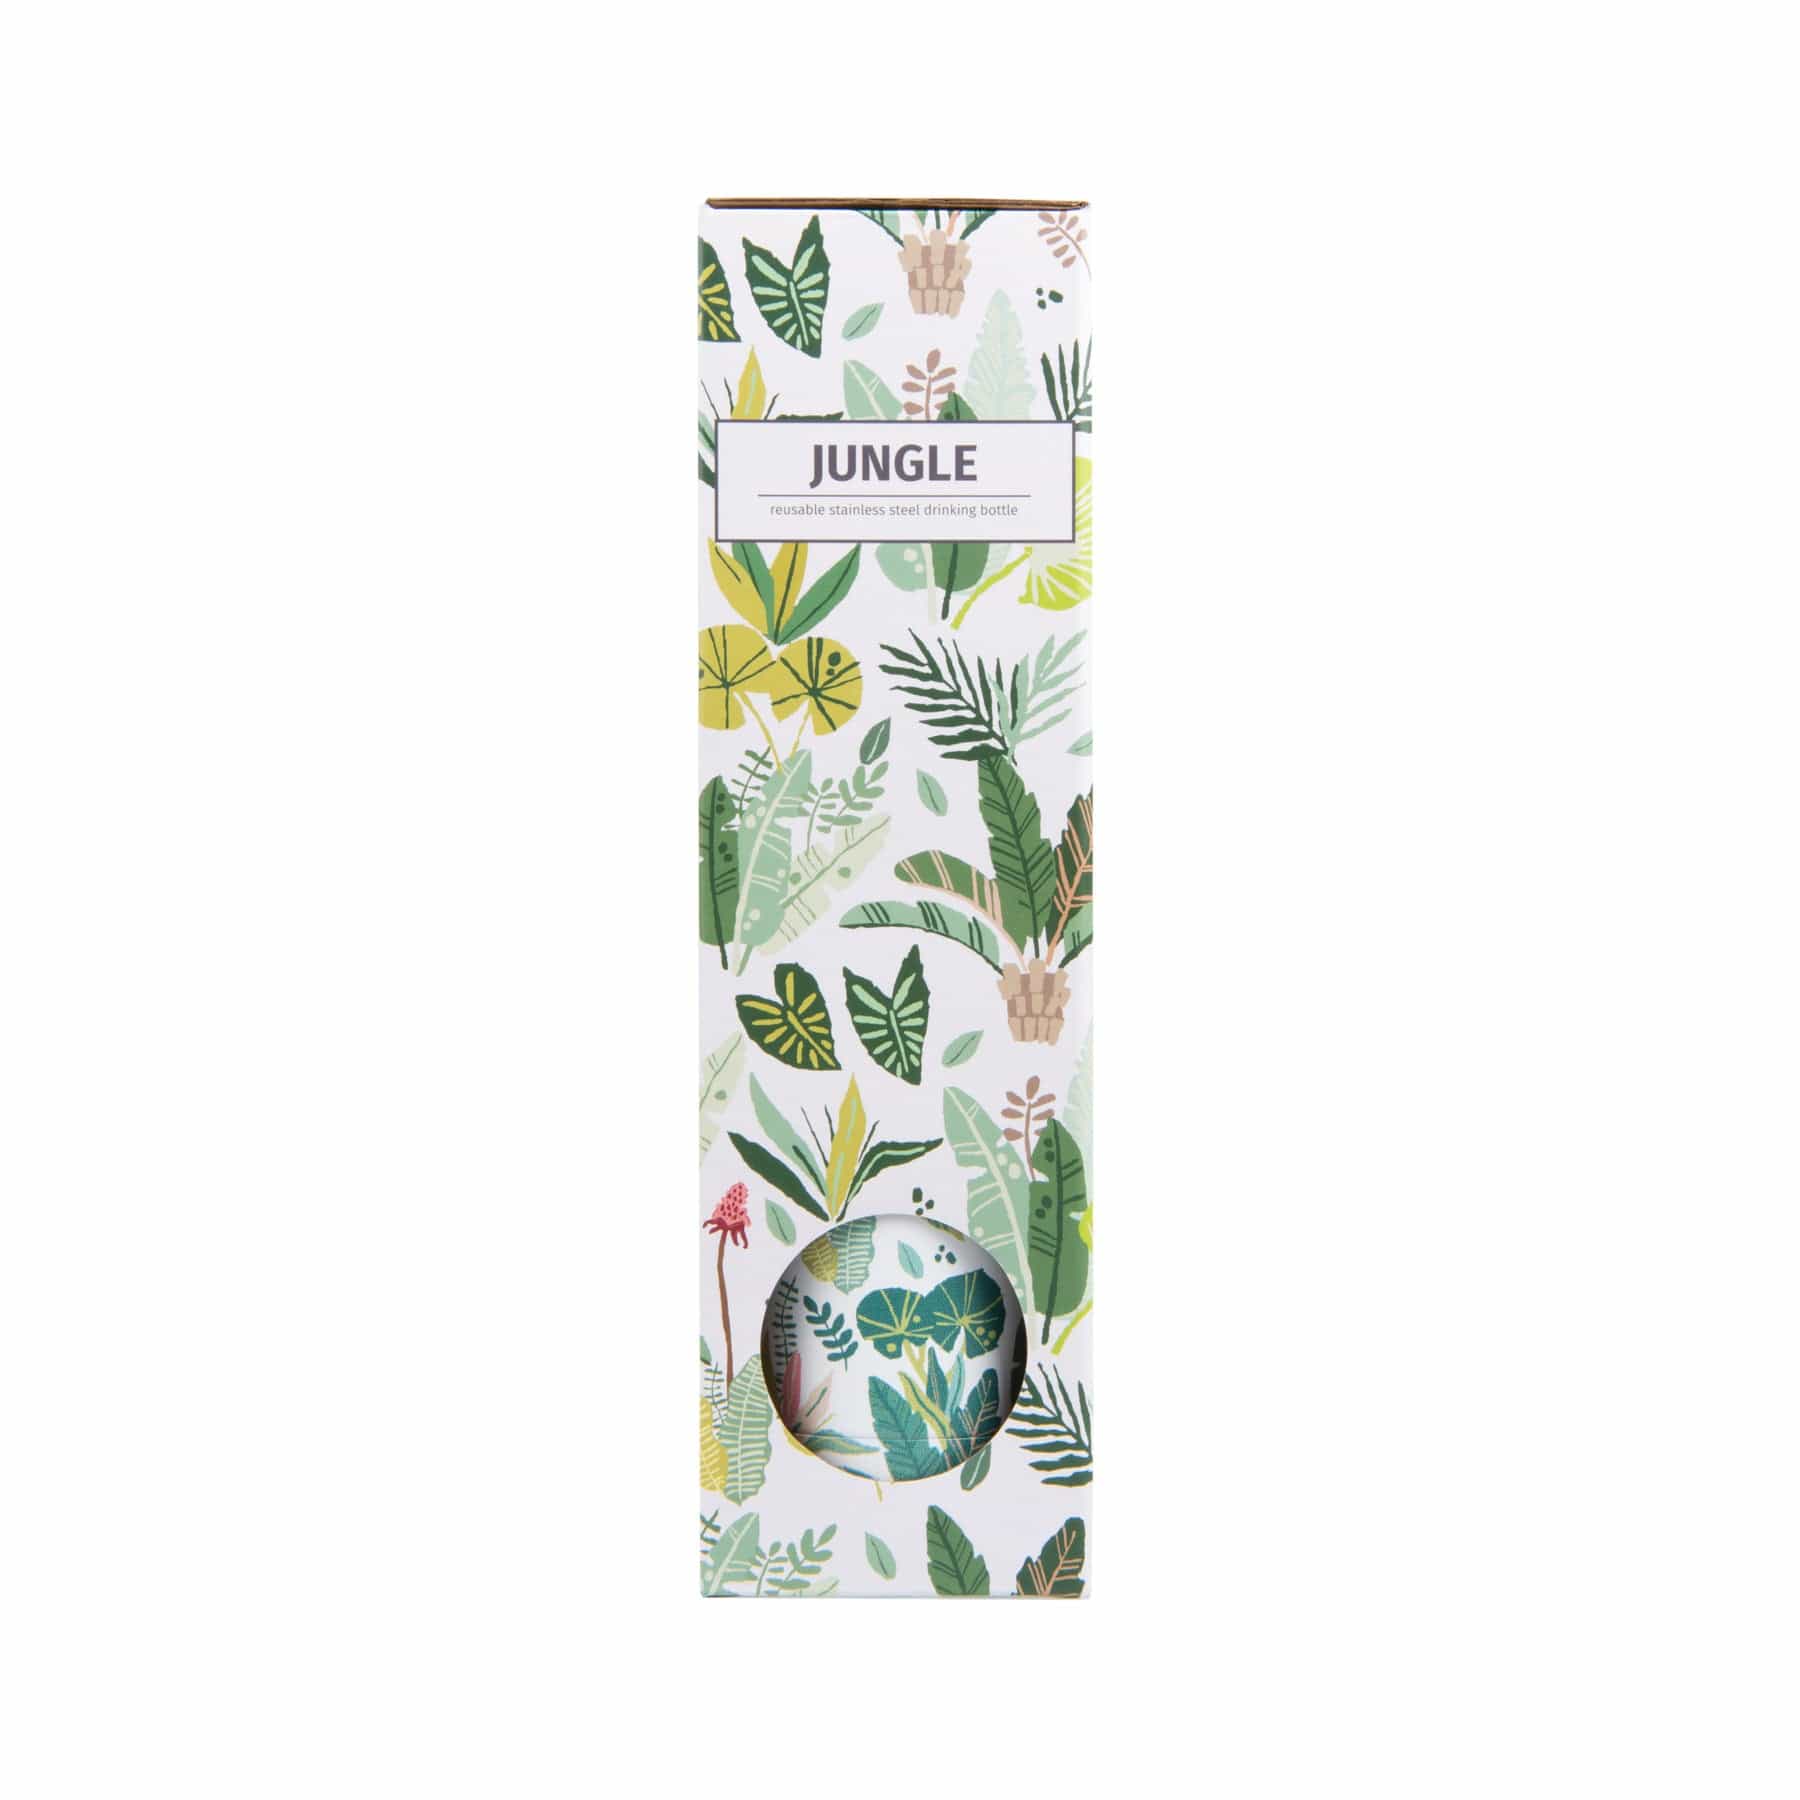 Jungle themed reusable stainless steel drinking bottle in packaging with tropical leaf pattern design